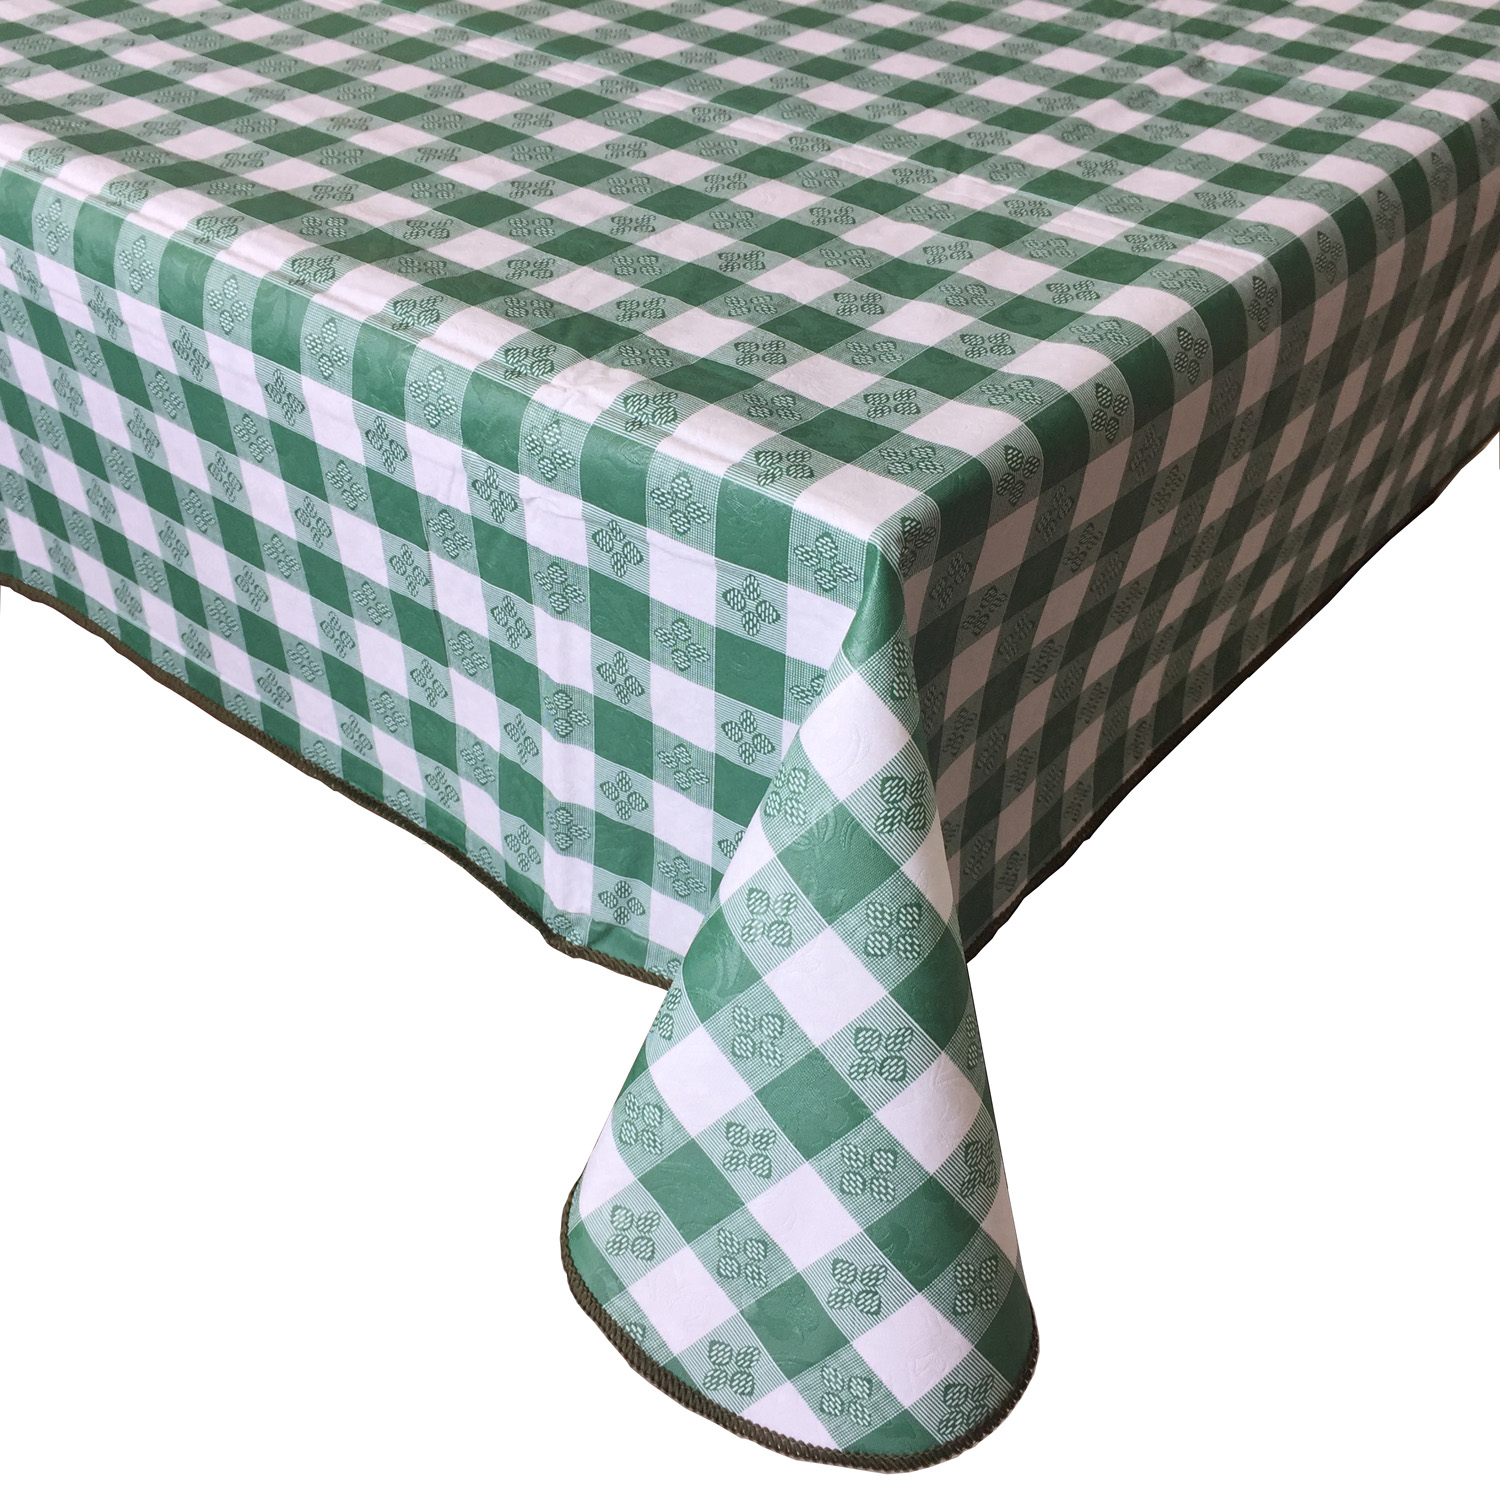 CAC China TCVG-52G Green Vinyl Table Cover with Flannel Back 52" x 52"